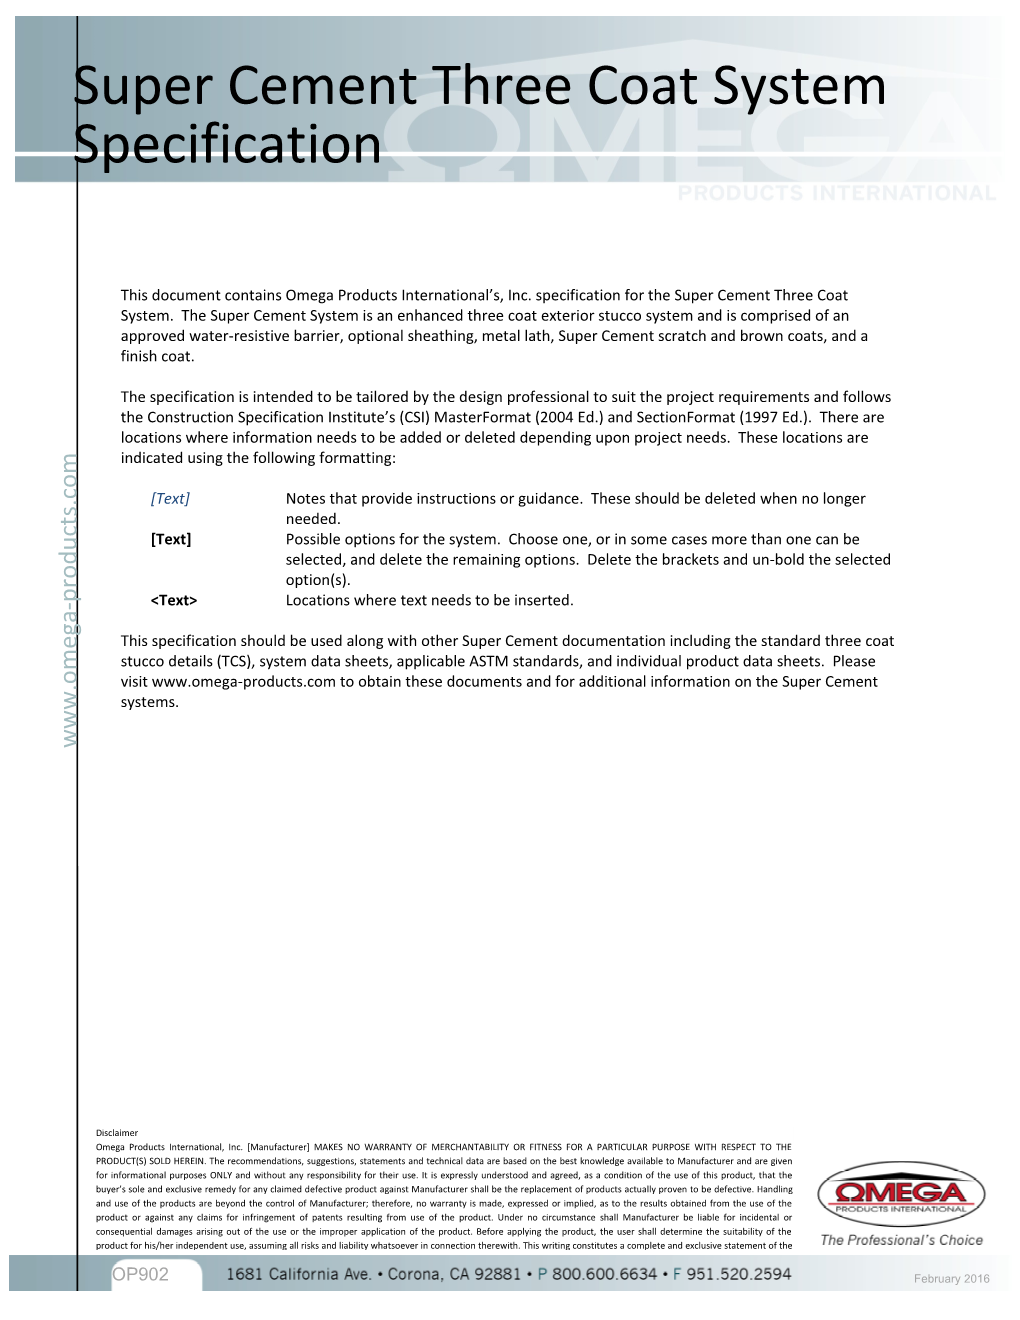 This Document Contains Omega Products International S, Inc. Specification for the Super